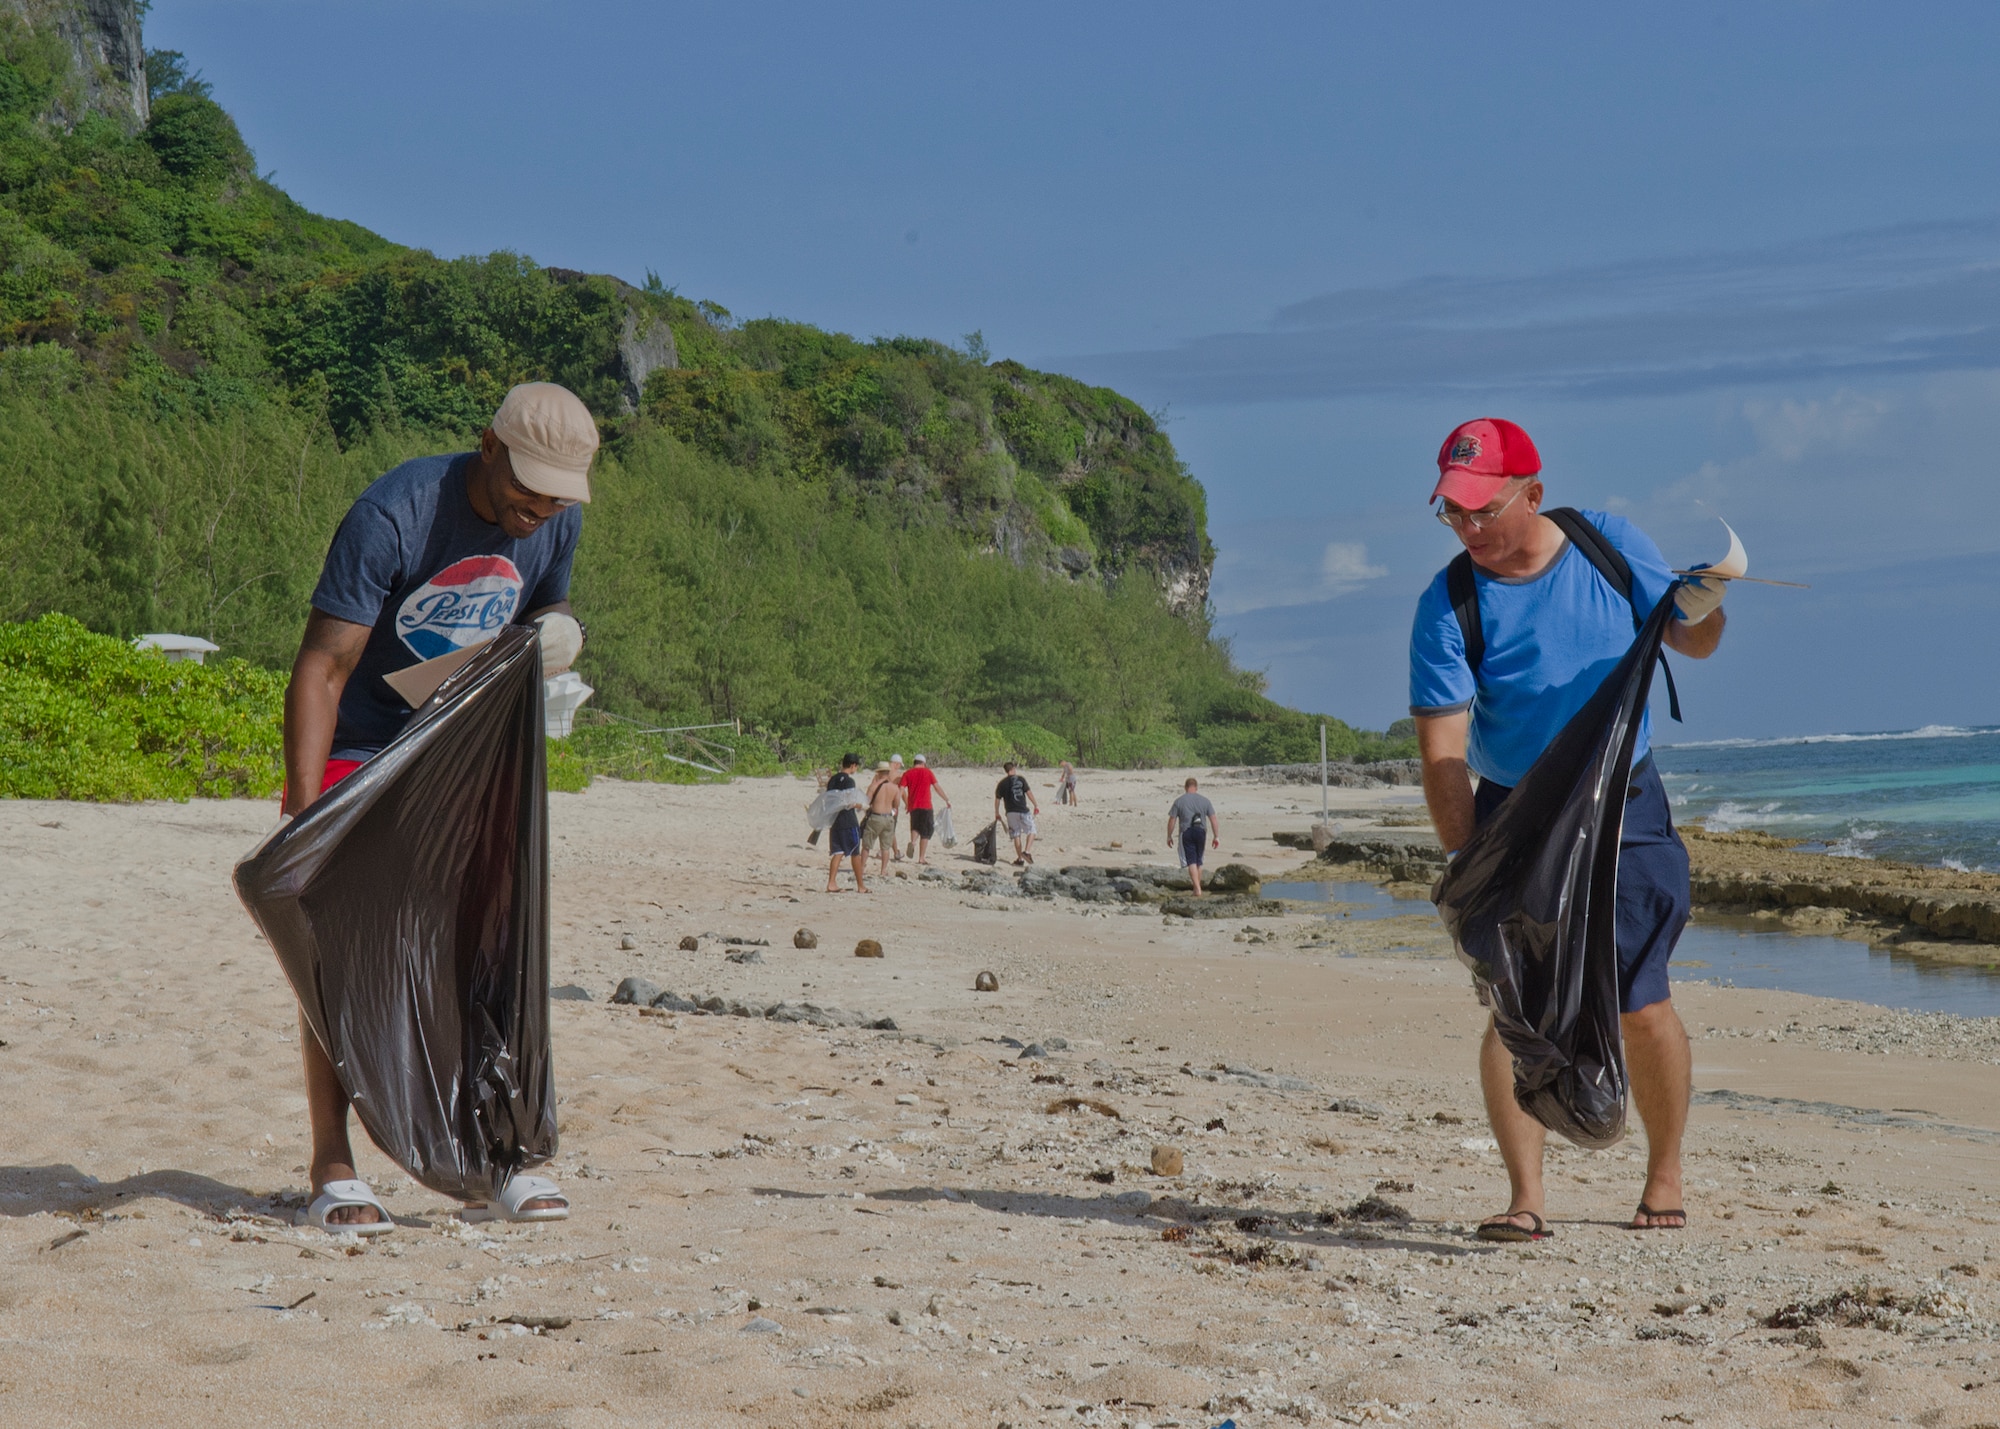 Master Sgt. Paul Johnson (left), 644th Combat Communications Squadron supply NCO in charge, and Tech. Sgt. Edward Mendiola, 254th RED HORSE HVAC technician, pick up trash along Tarague Beach during the 2nd Annual Earth Day Cleanup on Andersen Air Force Base, Guam, April 26, 2014. Approximately 35 volunteers picked up two truckloads of recyclable materials and refuse, ranging from cans to a tire. (U.S. Air Force photo by Senior Airman Katrina Brisbin/Released)